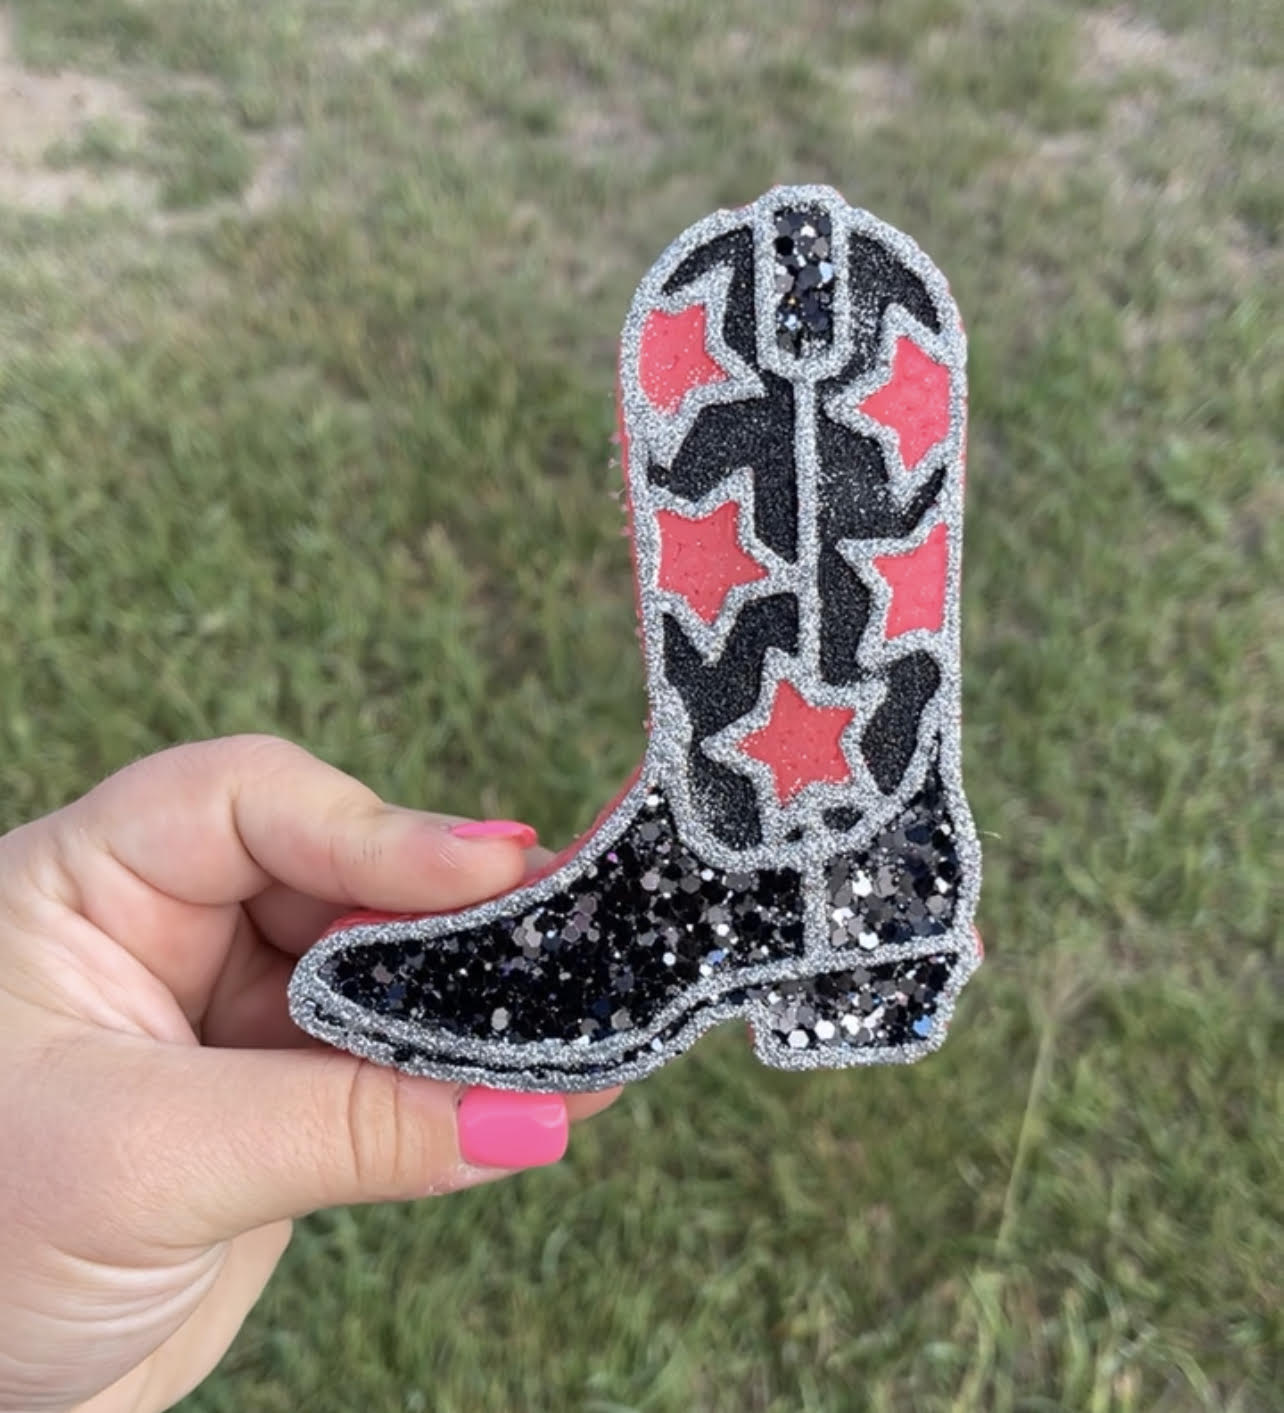 Cowgirl Boot with Stars Car Freshie